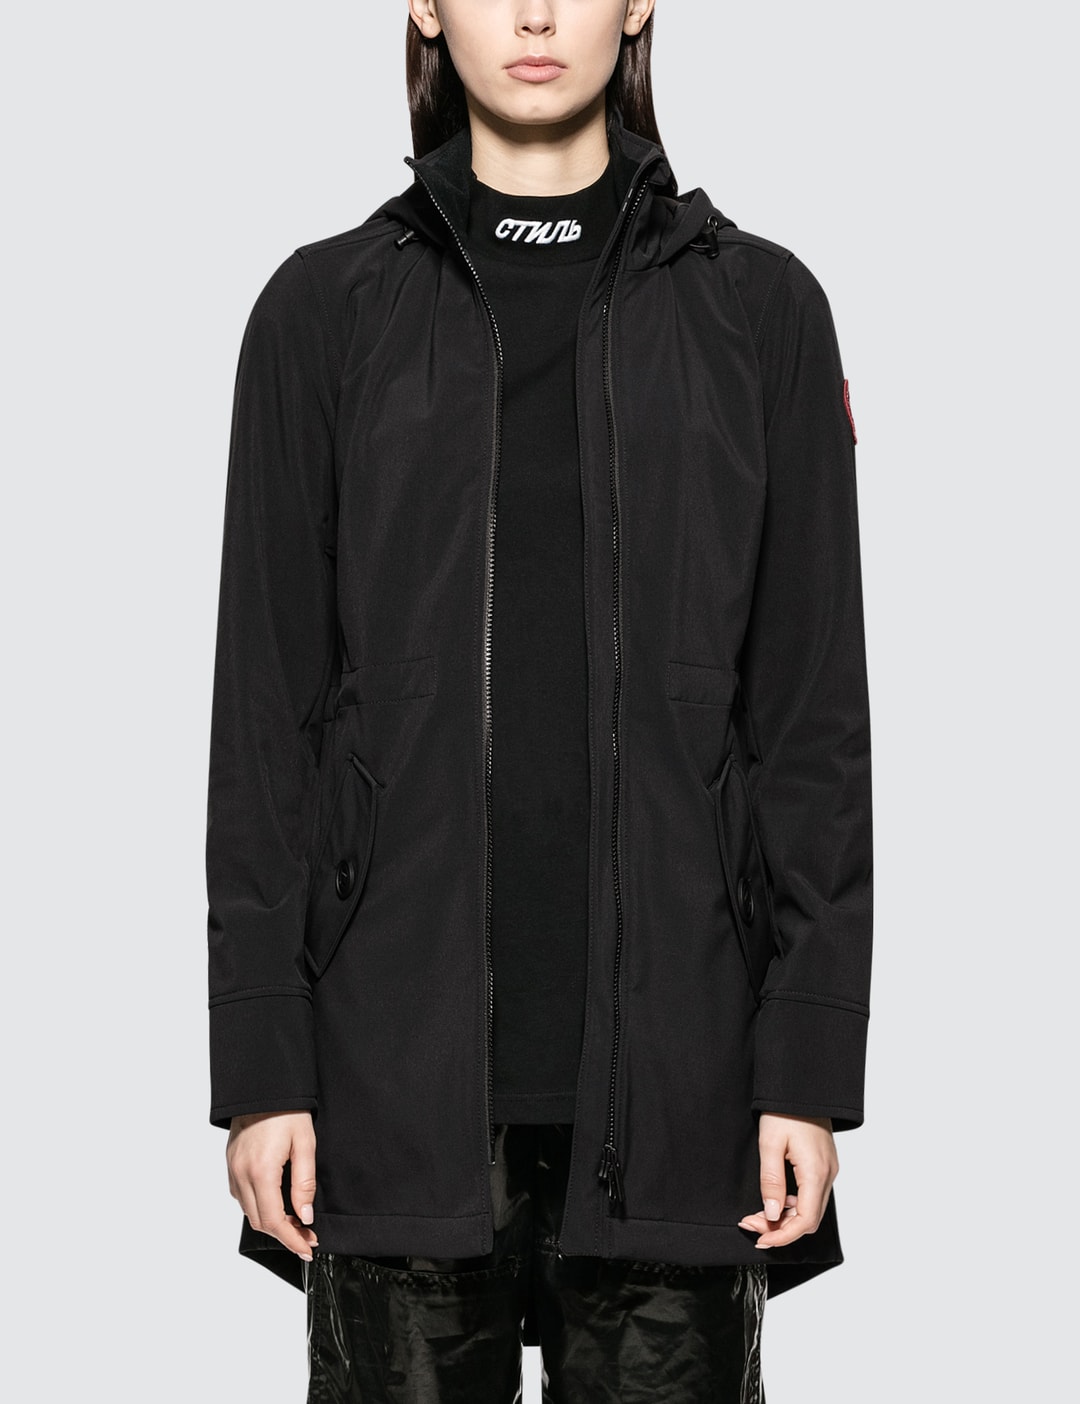 Canada Goose - Avery Jacket | HBX - Globally Curated Fashion and ...